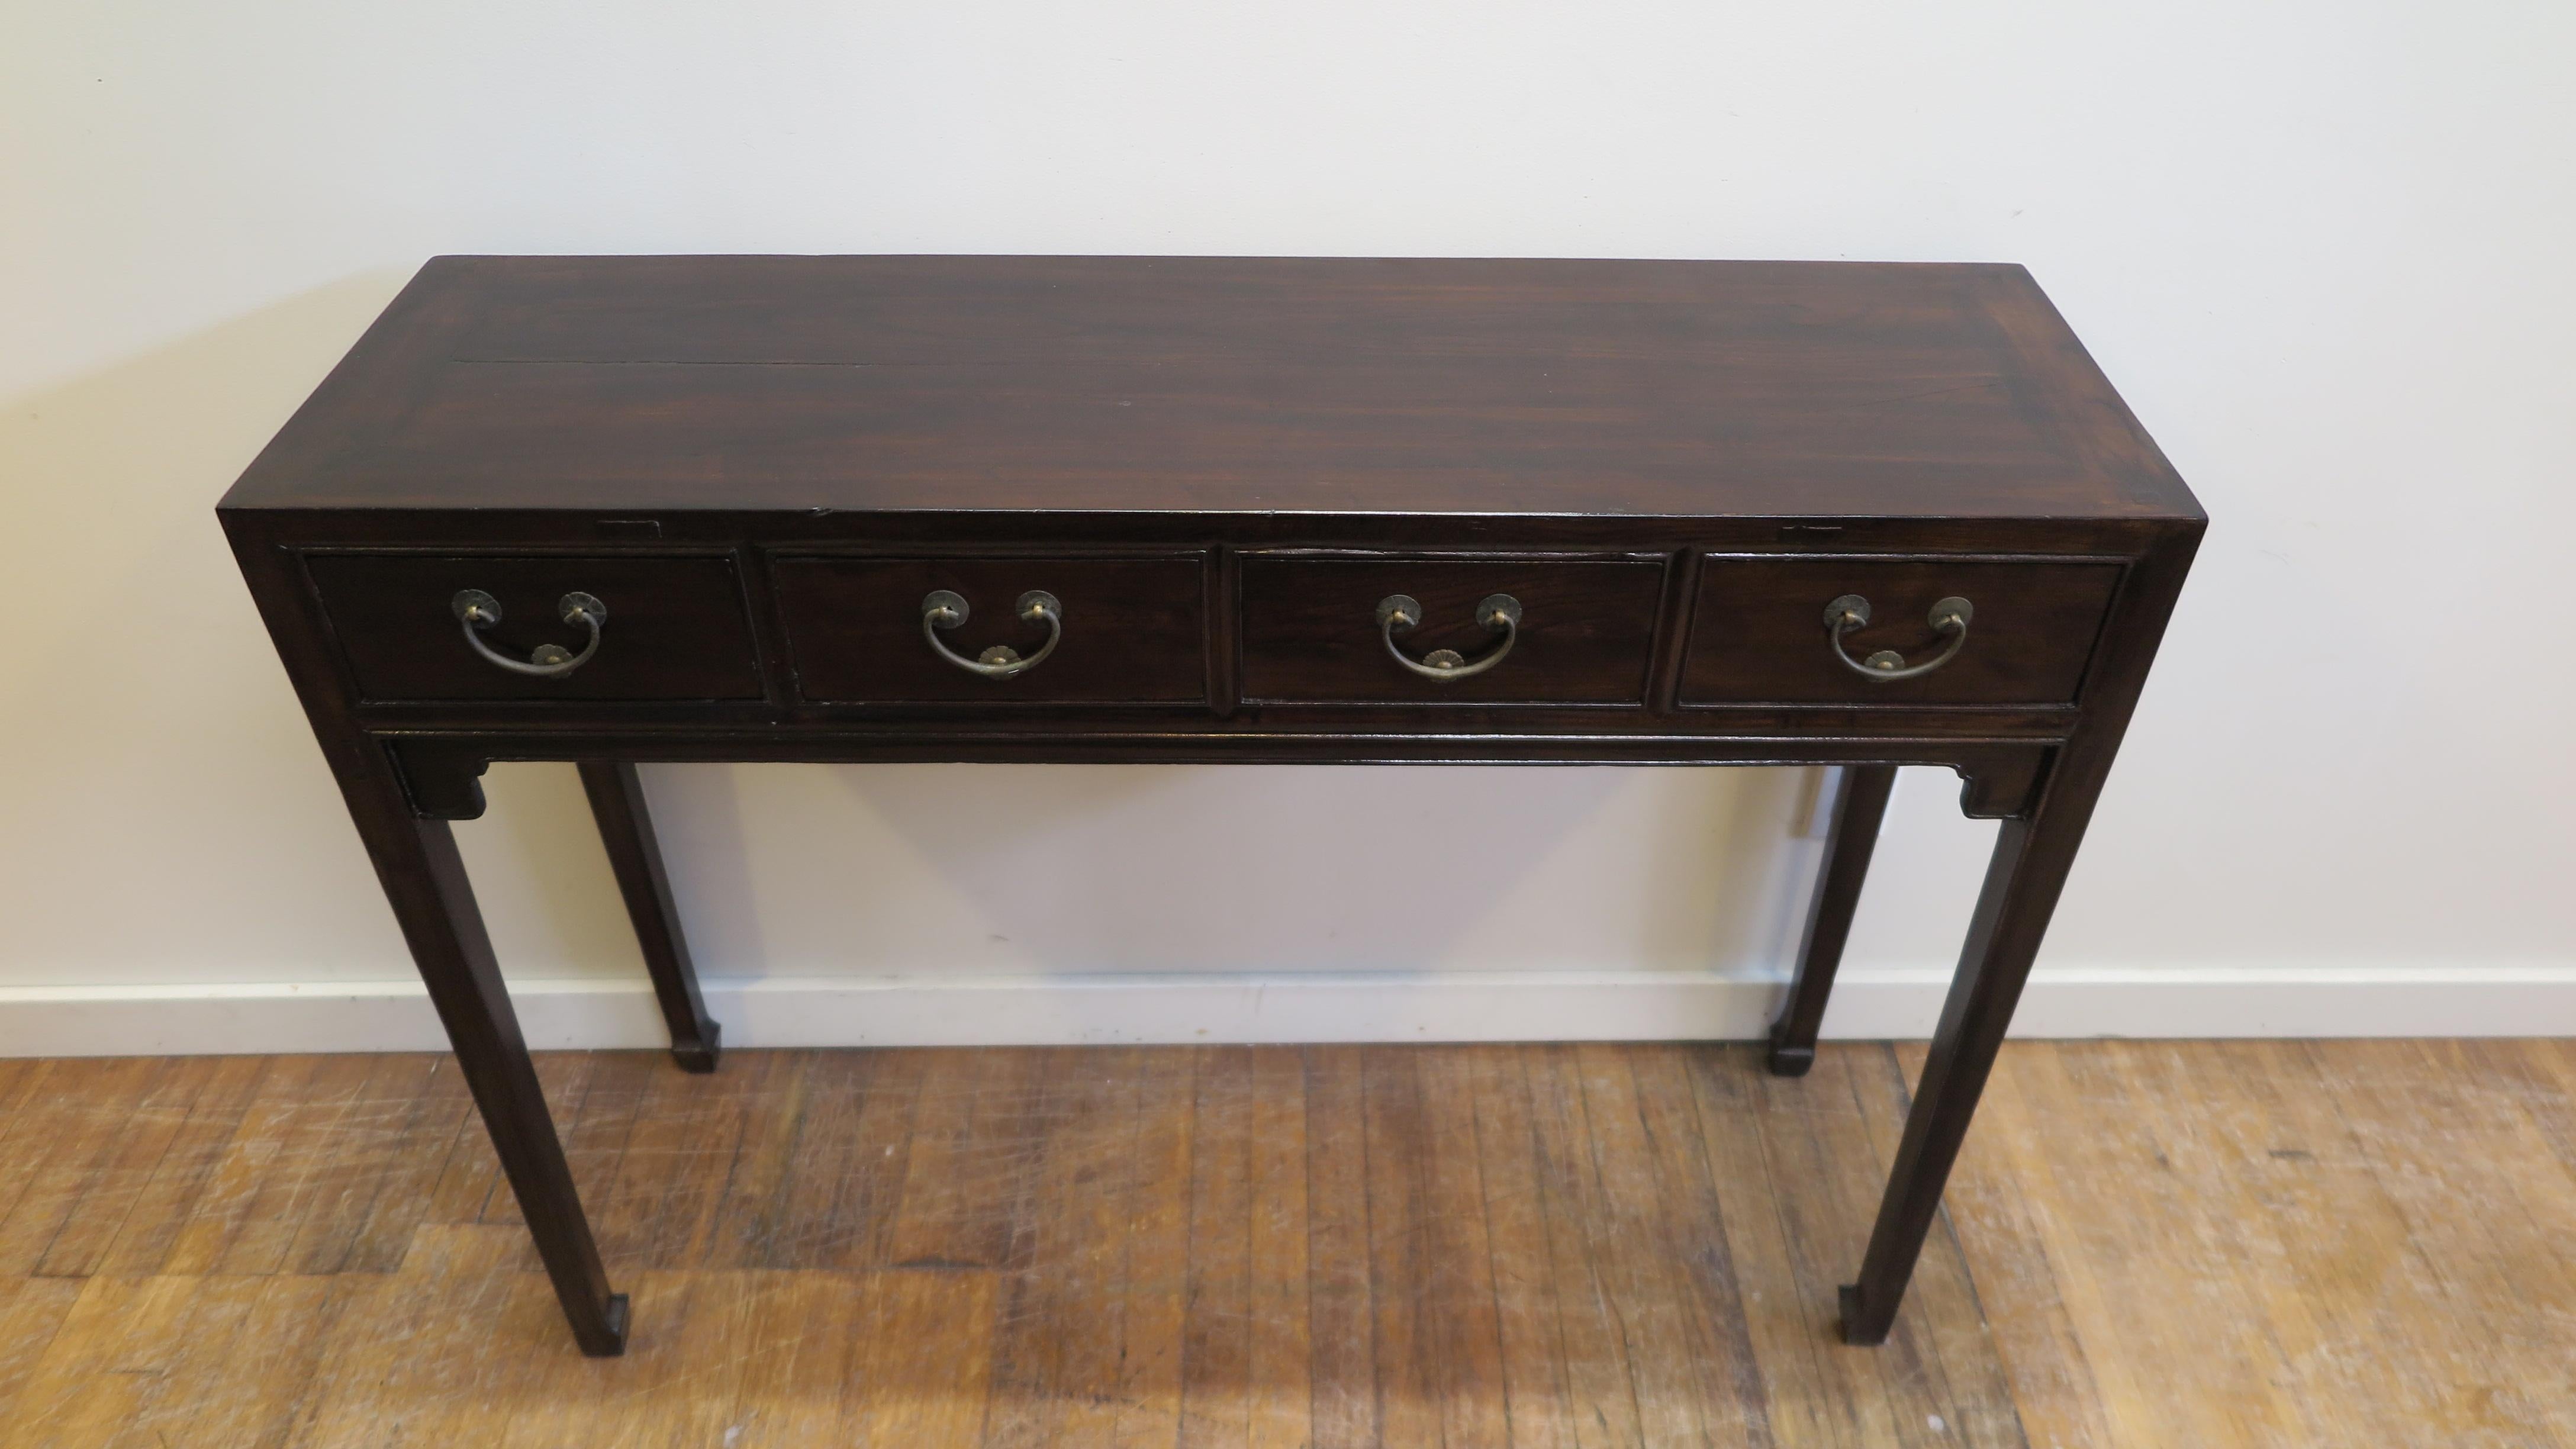 19th century Chinese console table. Four drawer thin console table elegant refined lines with swing handles and bumpers. Detailed apron with horse hoof feet. Good condition commensurate with age and use. Please see pictures. Having dings to the